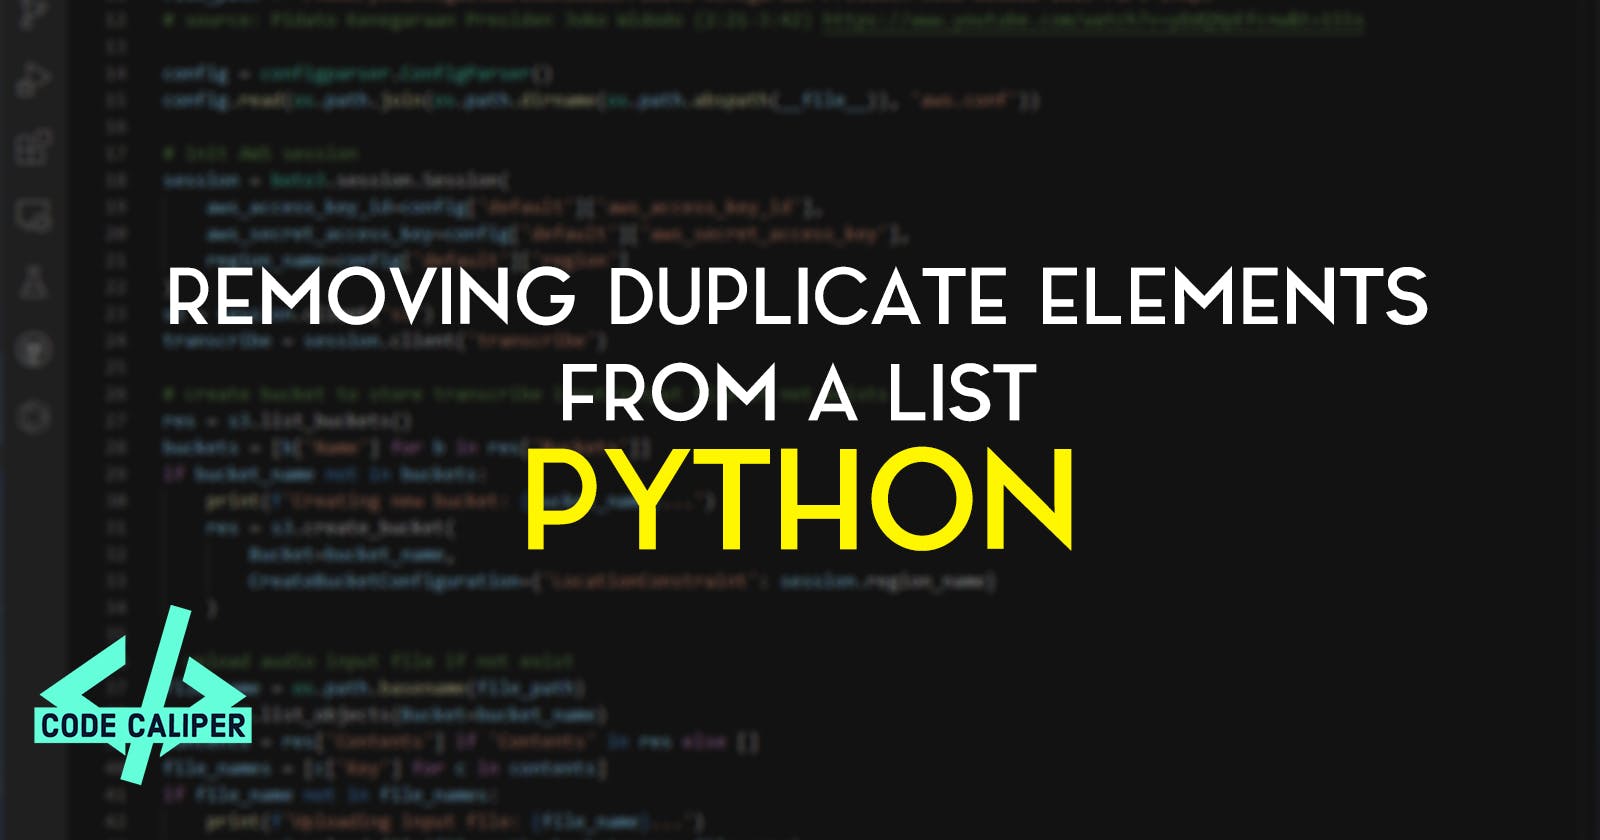 Removing Duplicate Elements from a List in Python